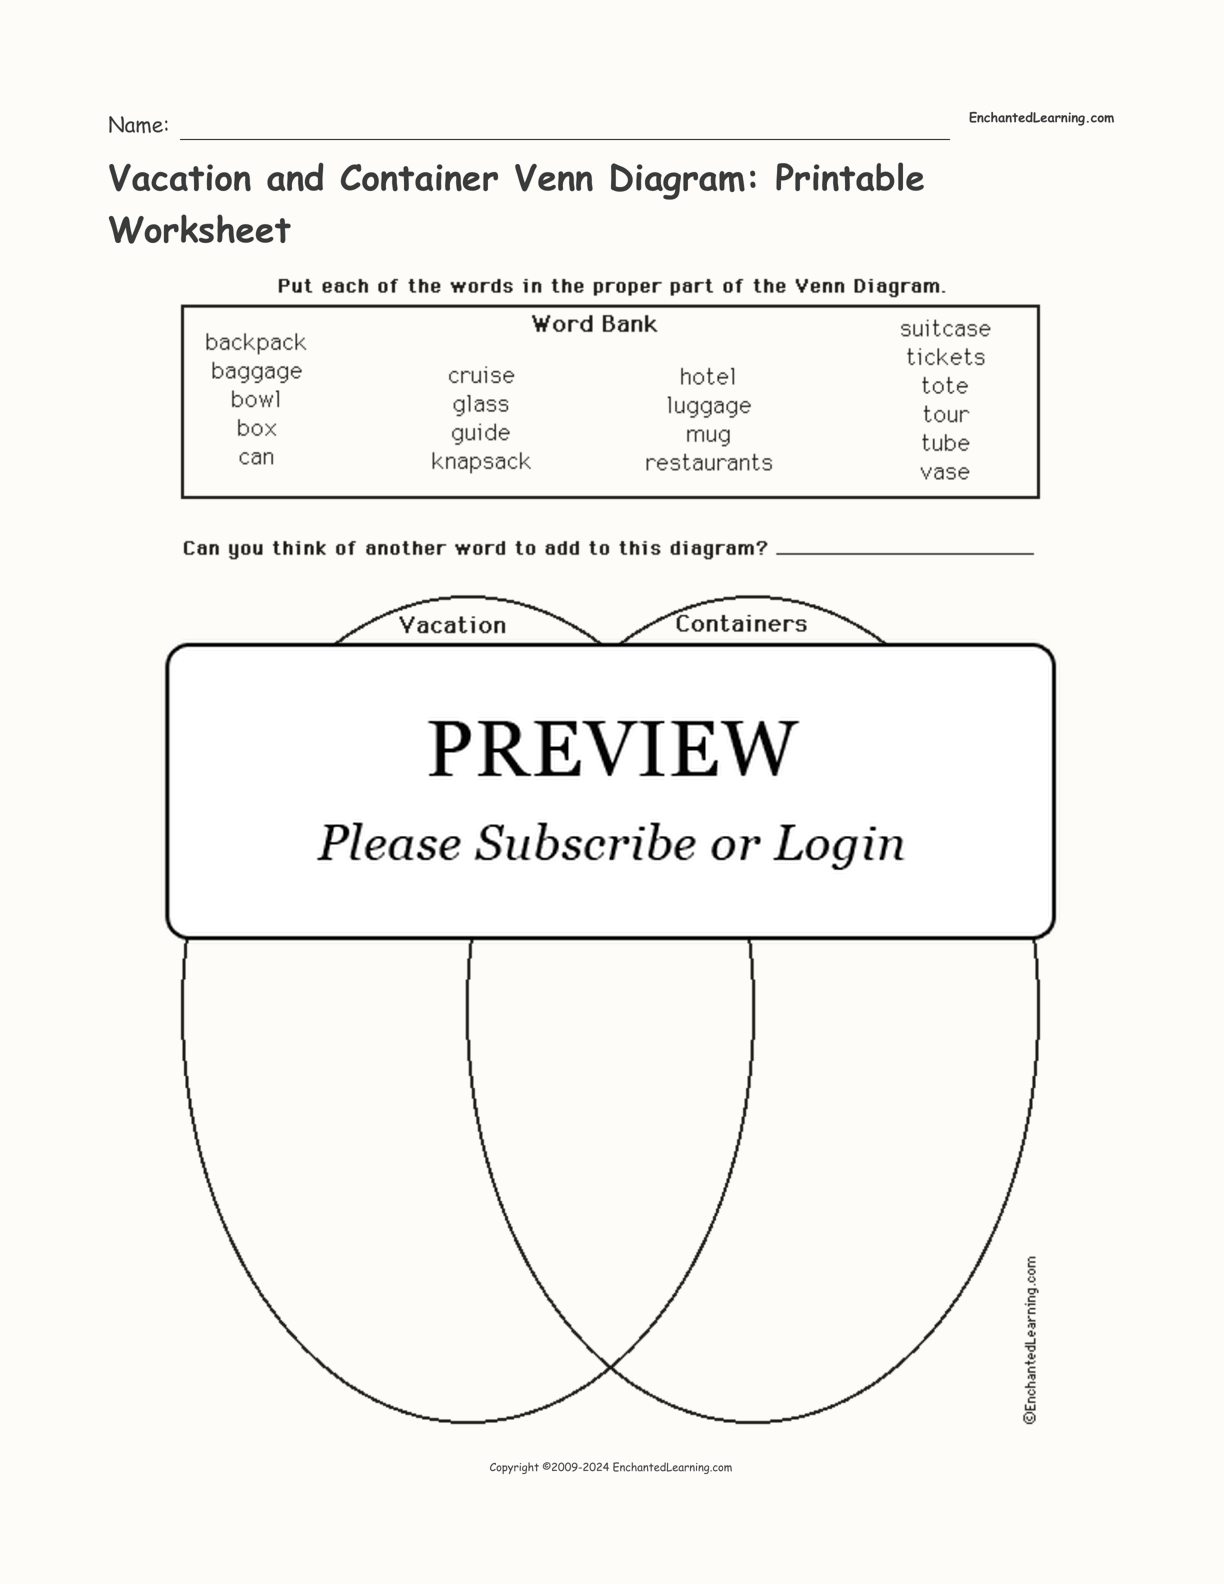 Vacation and Container Venn Diagram: Printable Worksheet interactive worksheet page 1